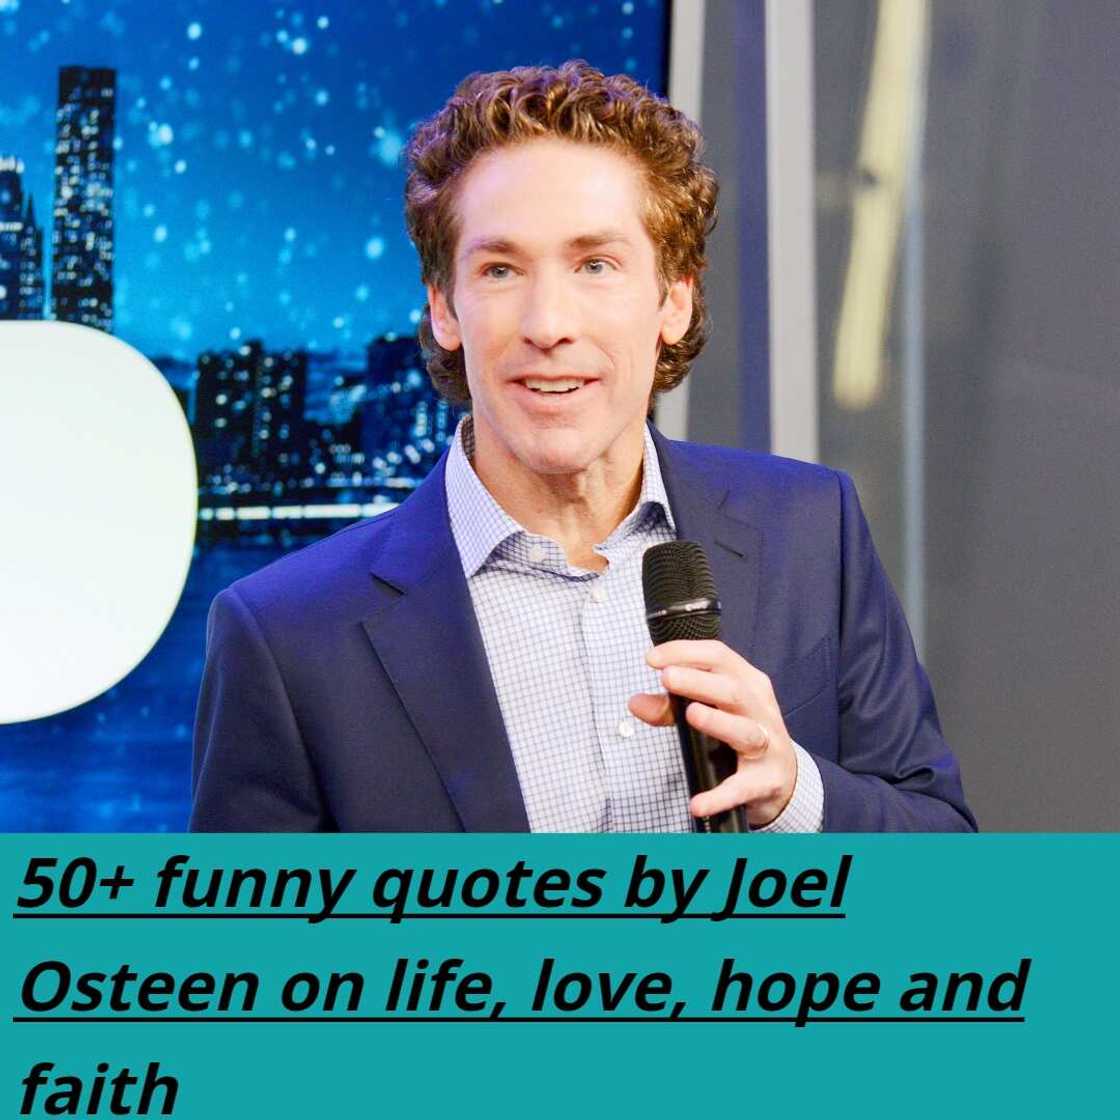 Joel Osteen's quotes about faith